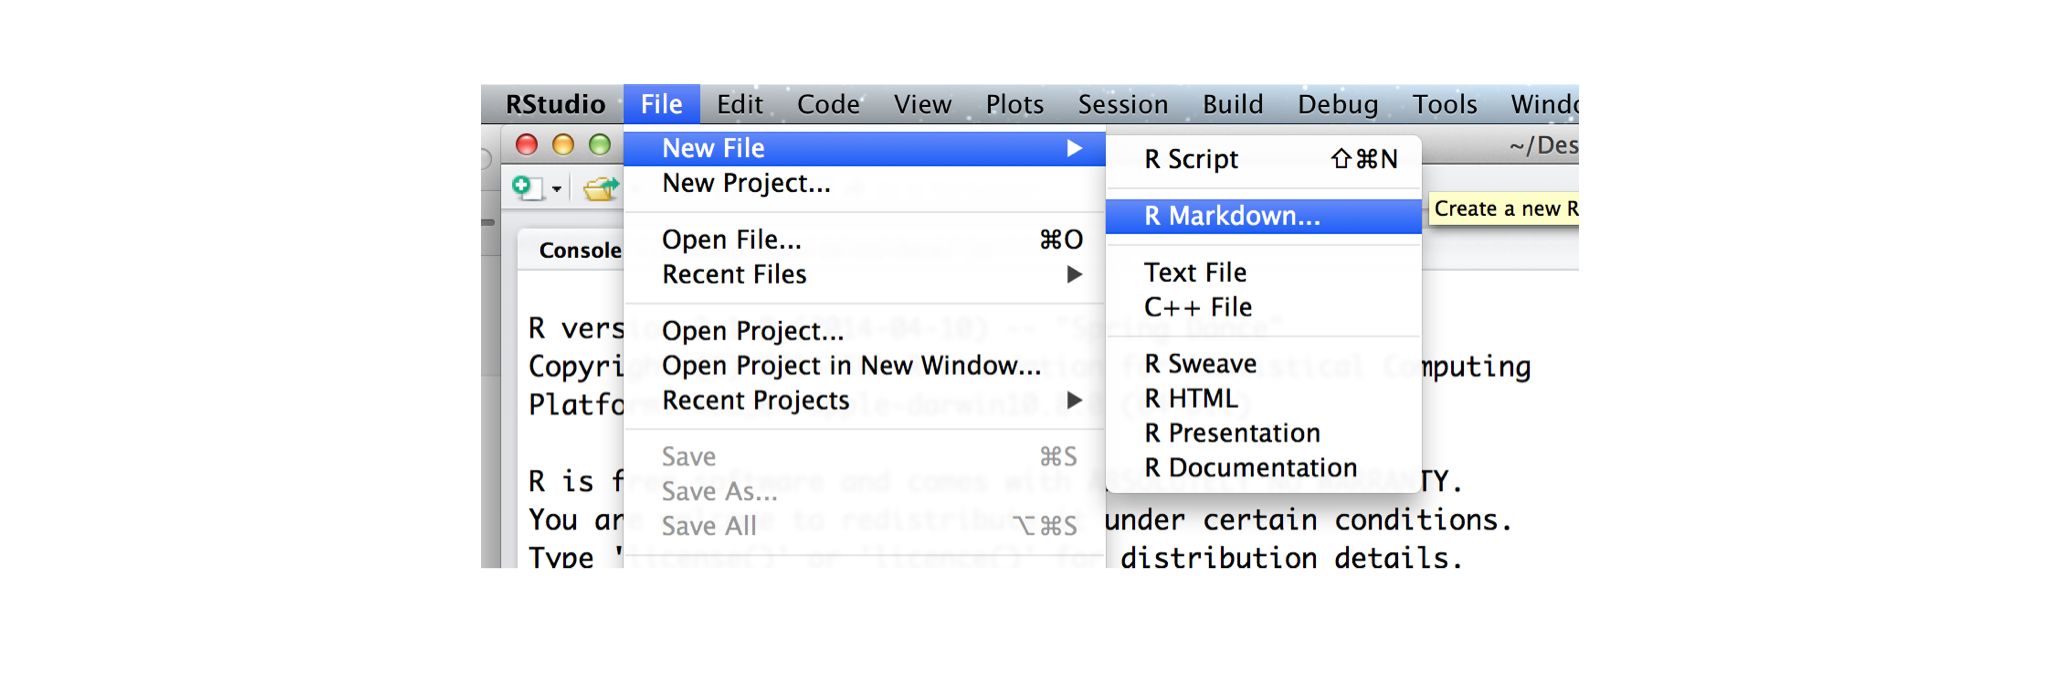 Drop down menu for File in the RStudio IDE. Then New File, then R Markdown.